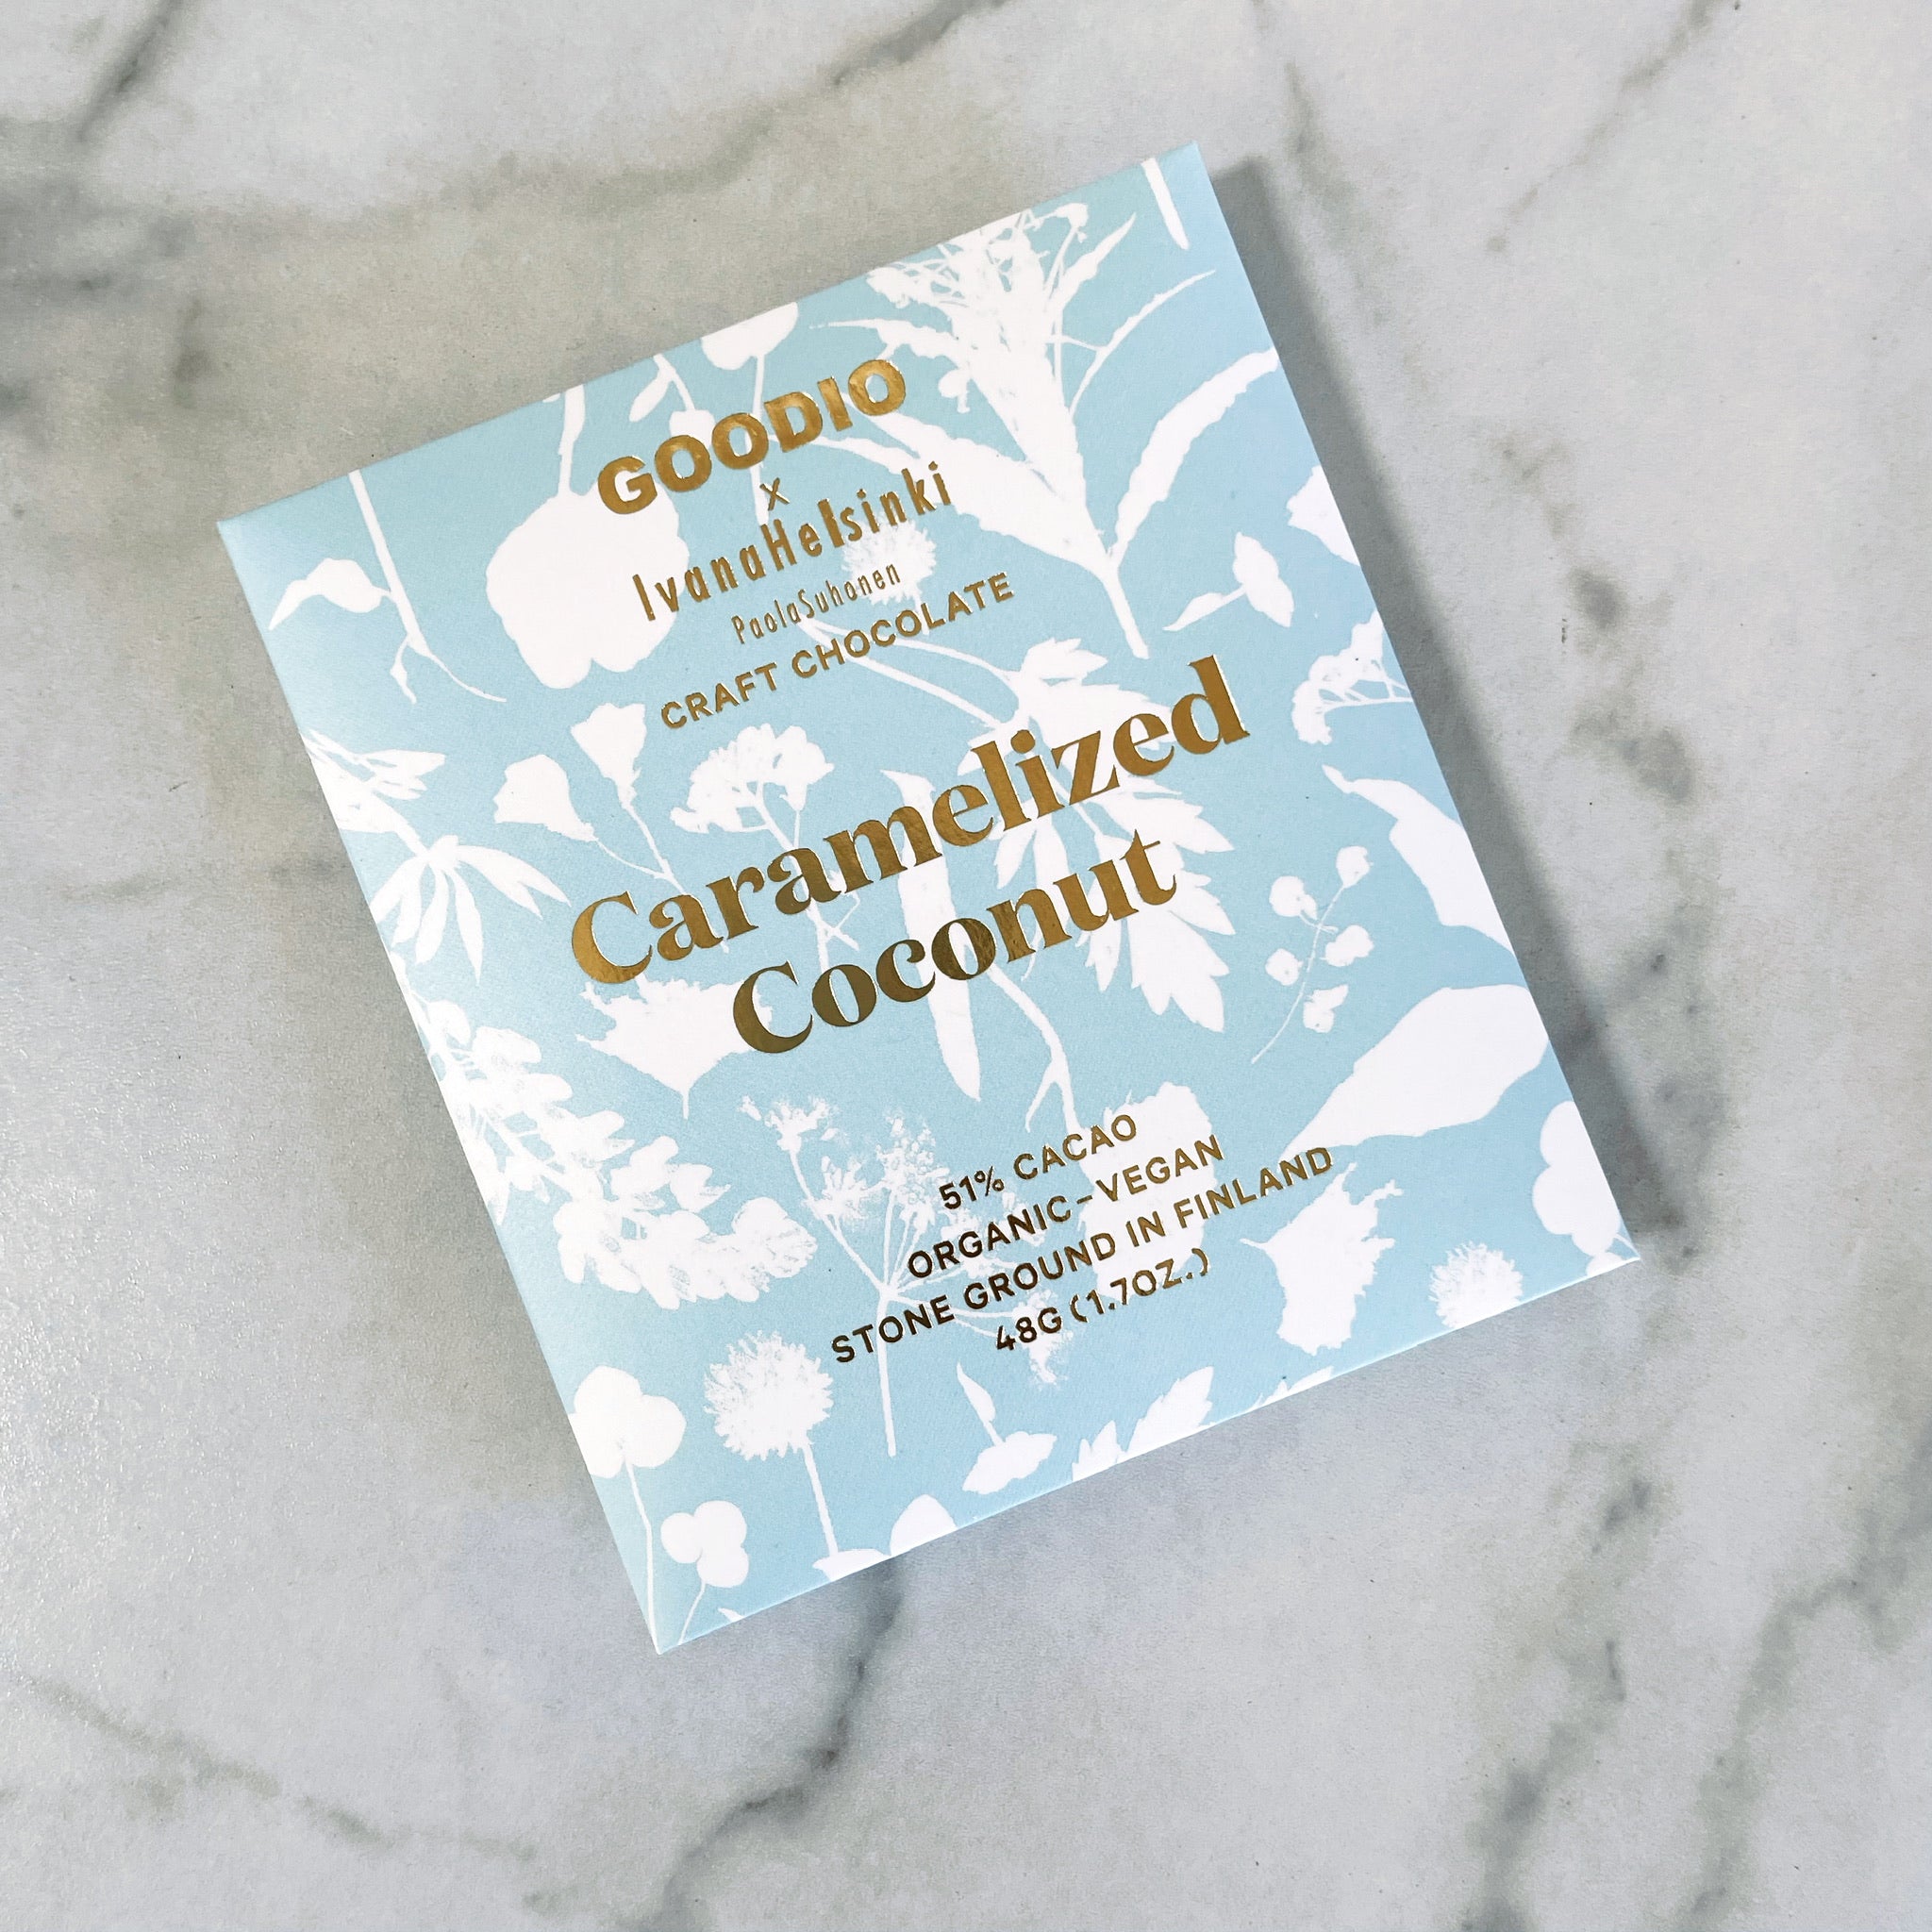 Goodio's Caramelized Coconut chocolate bar with a white and blue floral packing.